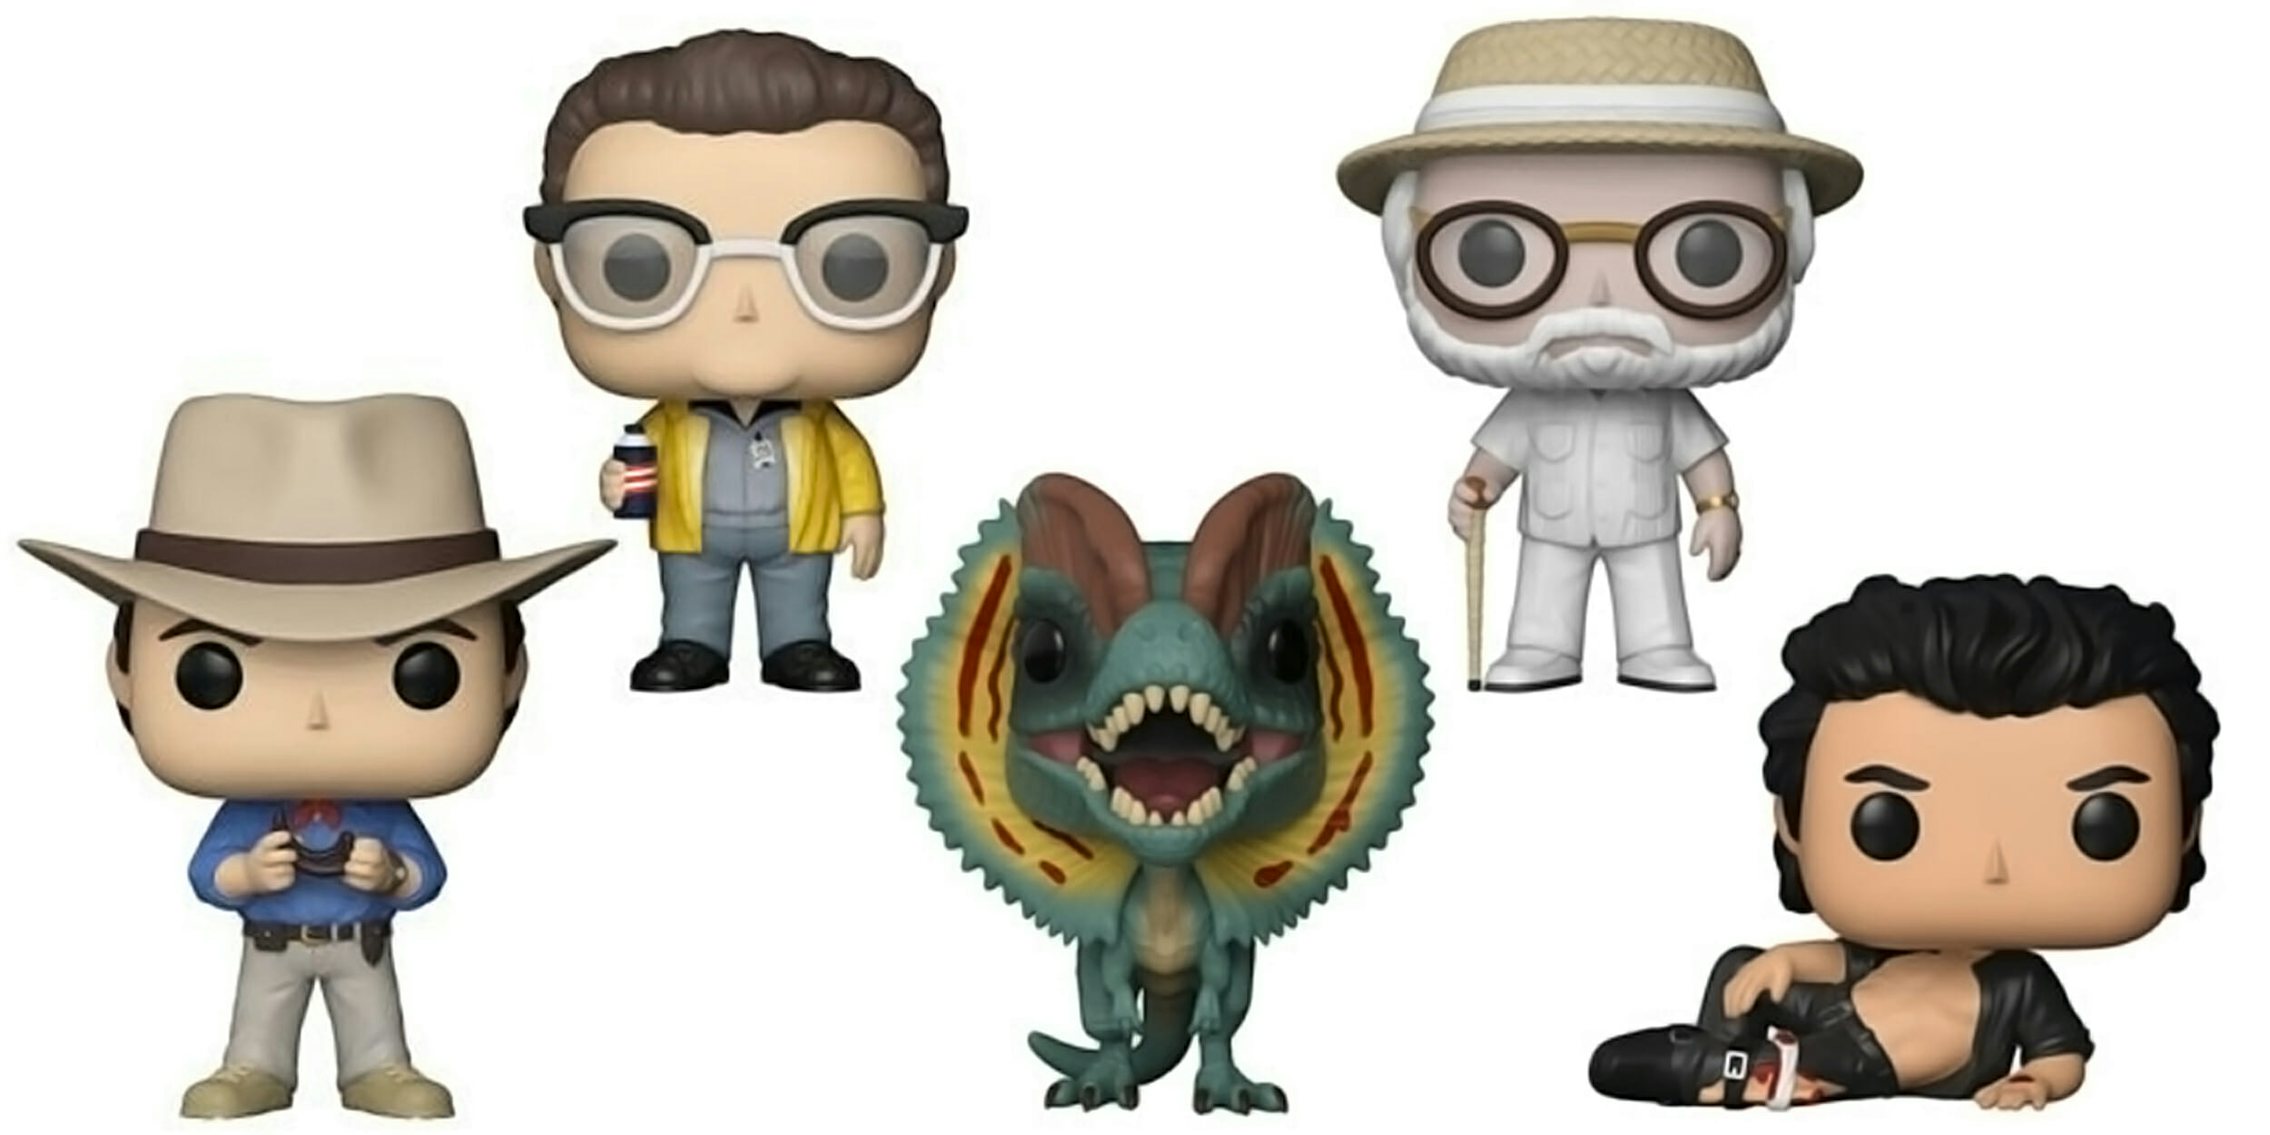 Hold on to Your Butts – Jurassic Park Dinosaur Funko Pops Are Here!